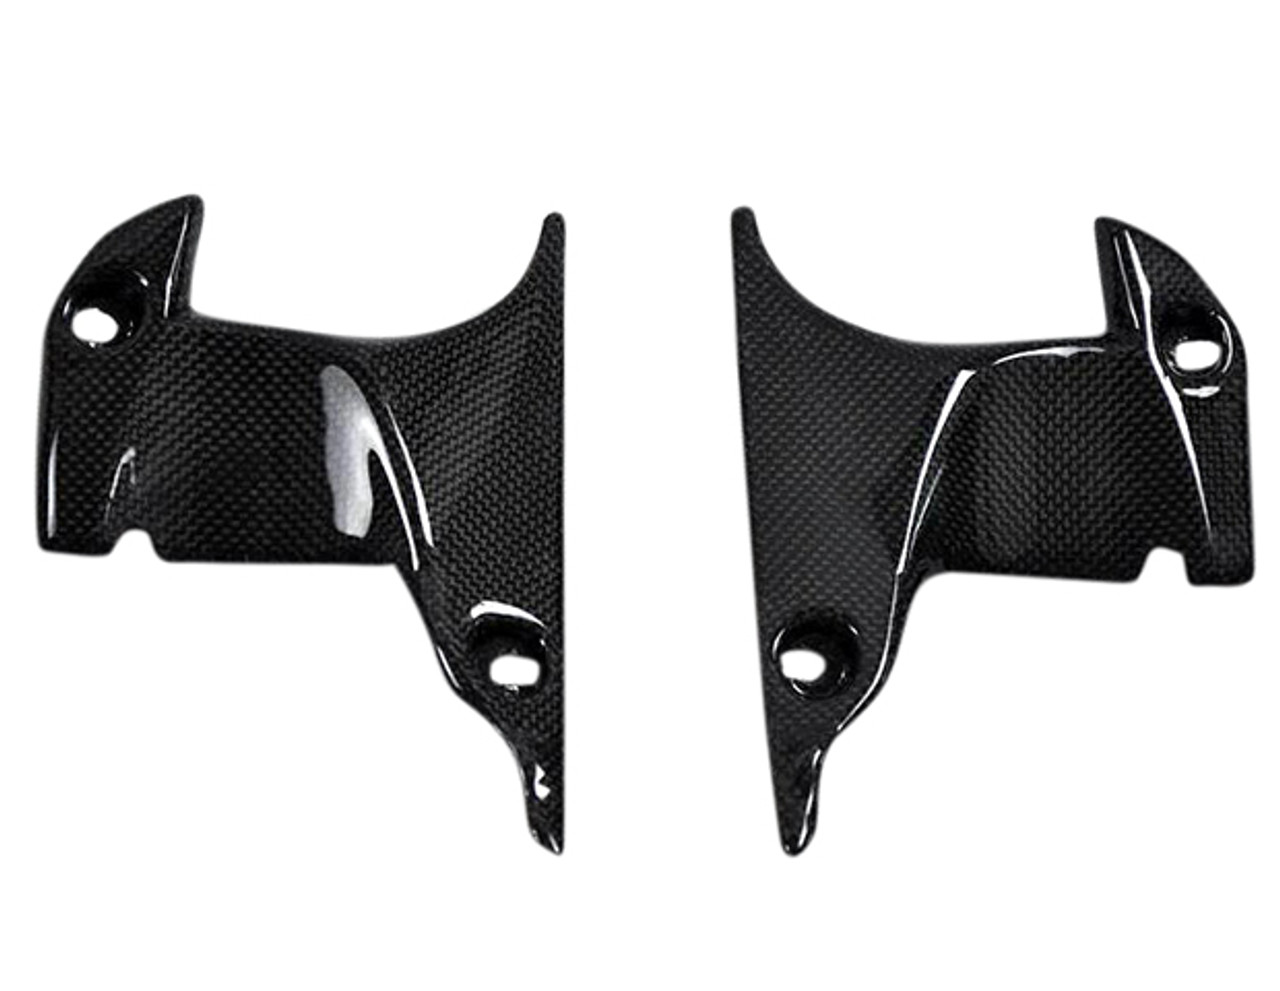 Glossy Plain Weave Carbon Fiber Ram Air Front Covers for Yamaha R1 07-08